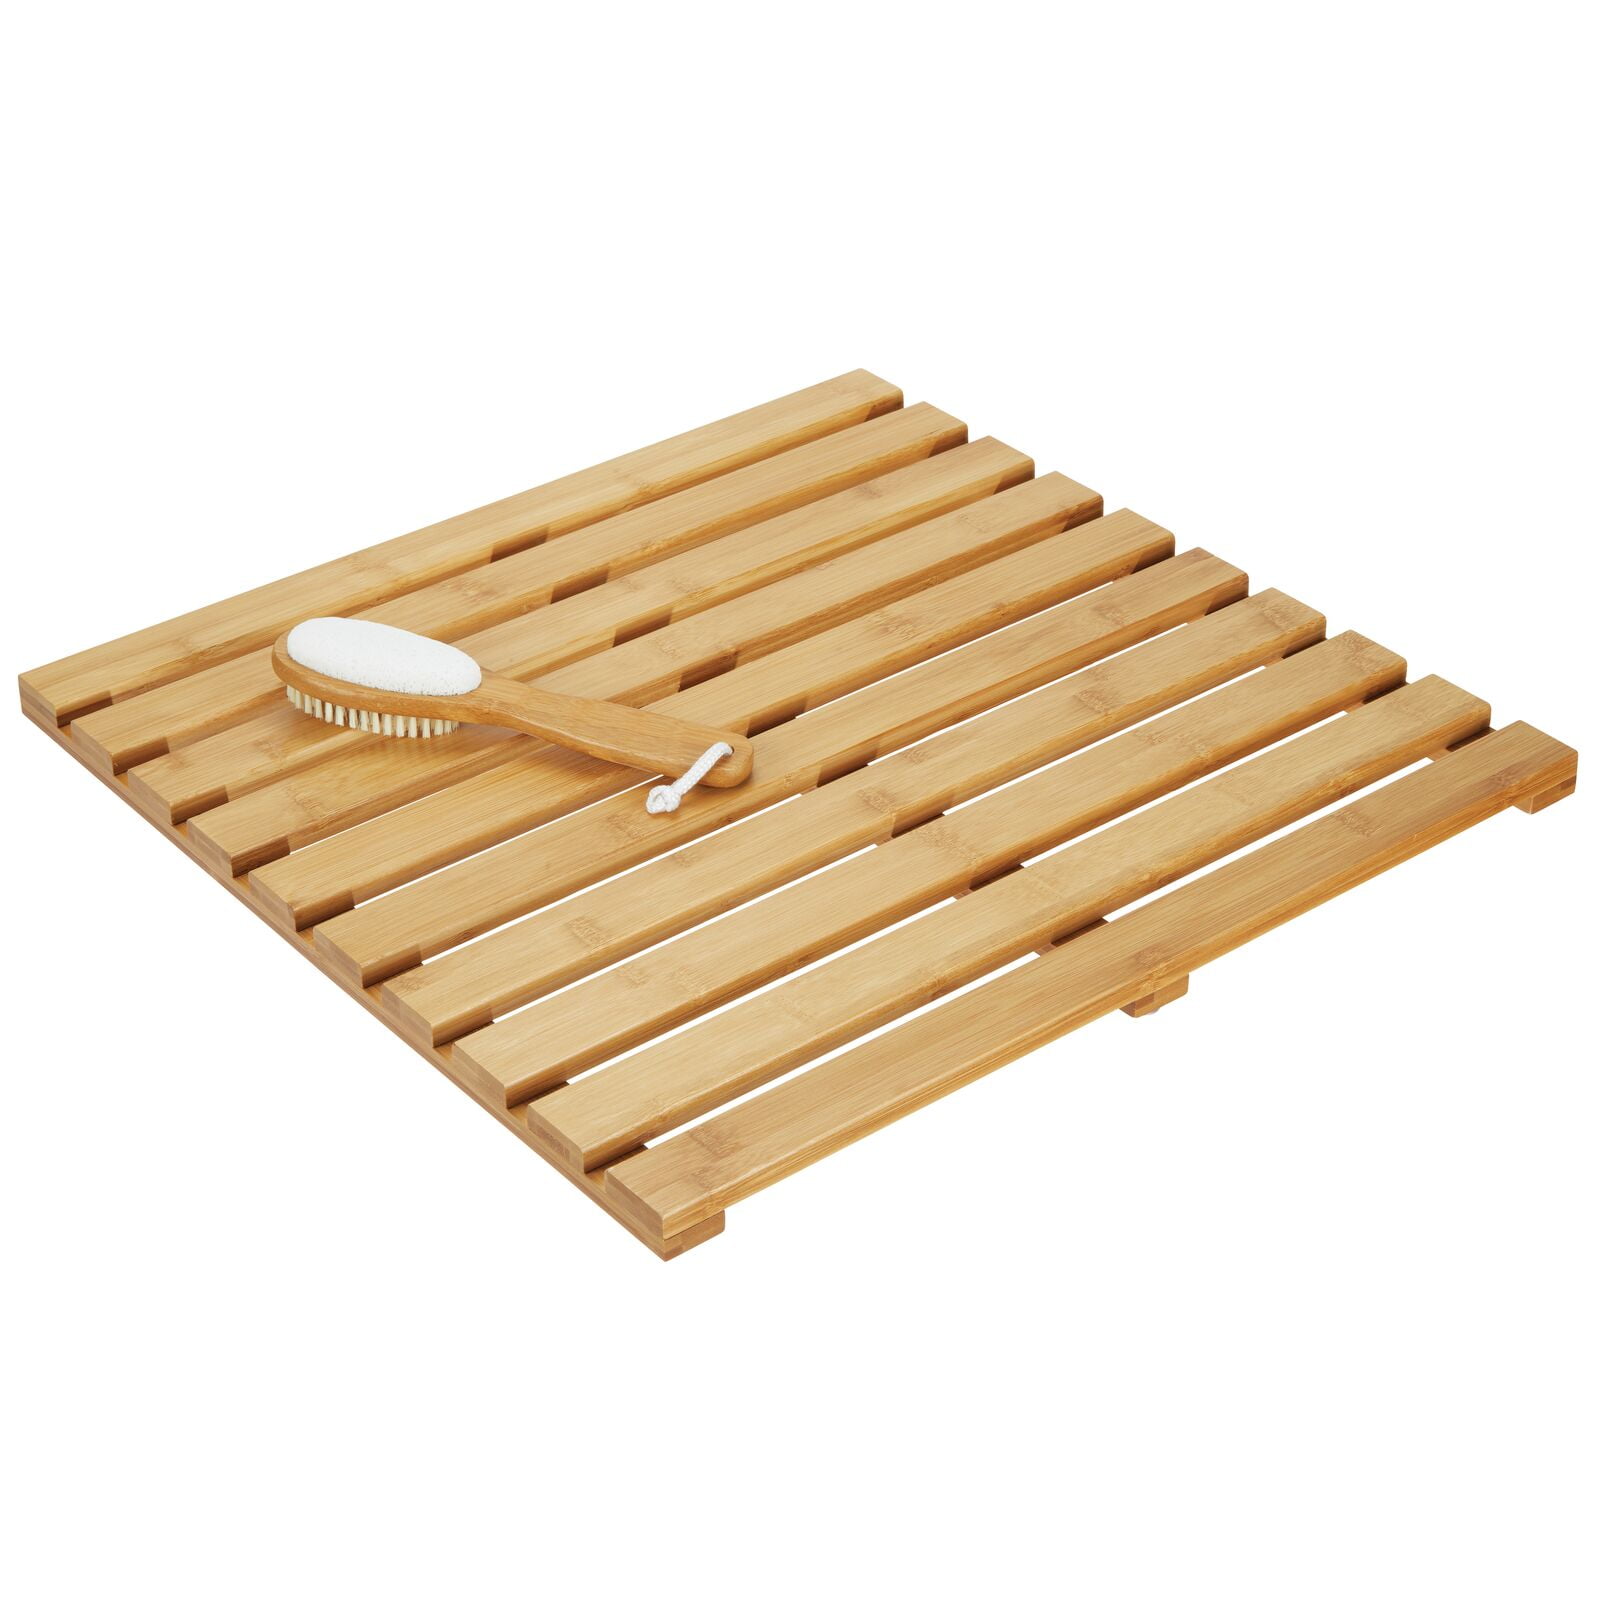 SlipX Solutions 24.5 in. x 16.5 in. Bamboo Bath Mat, Natural